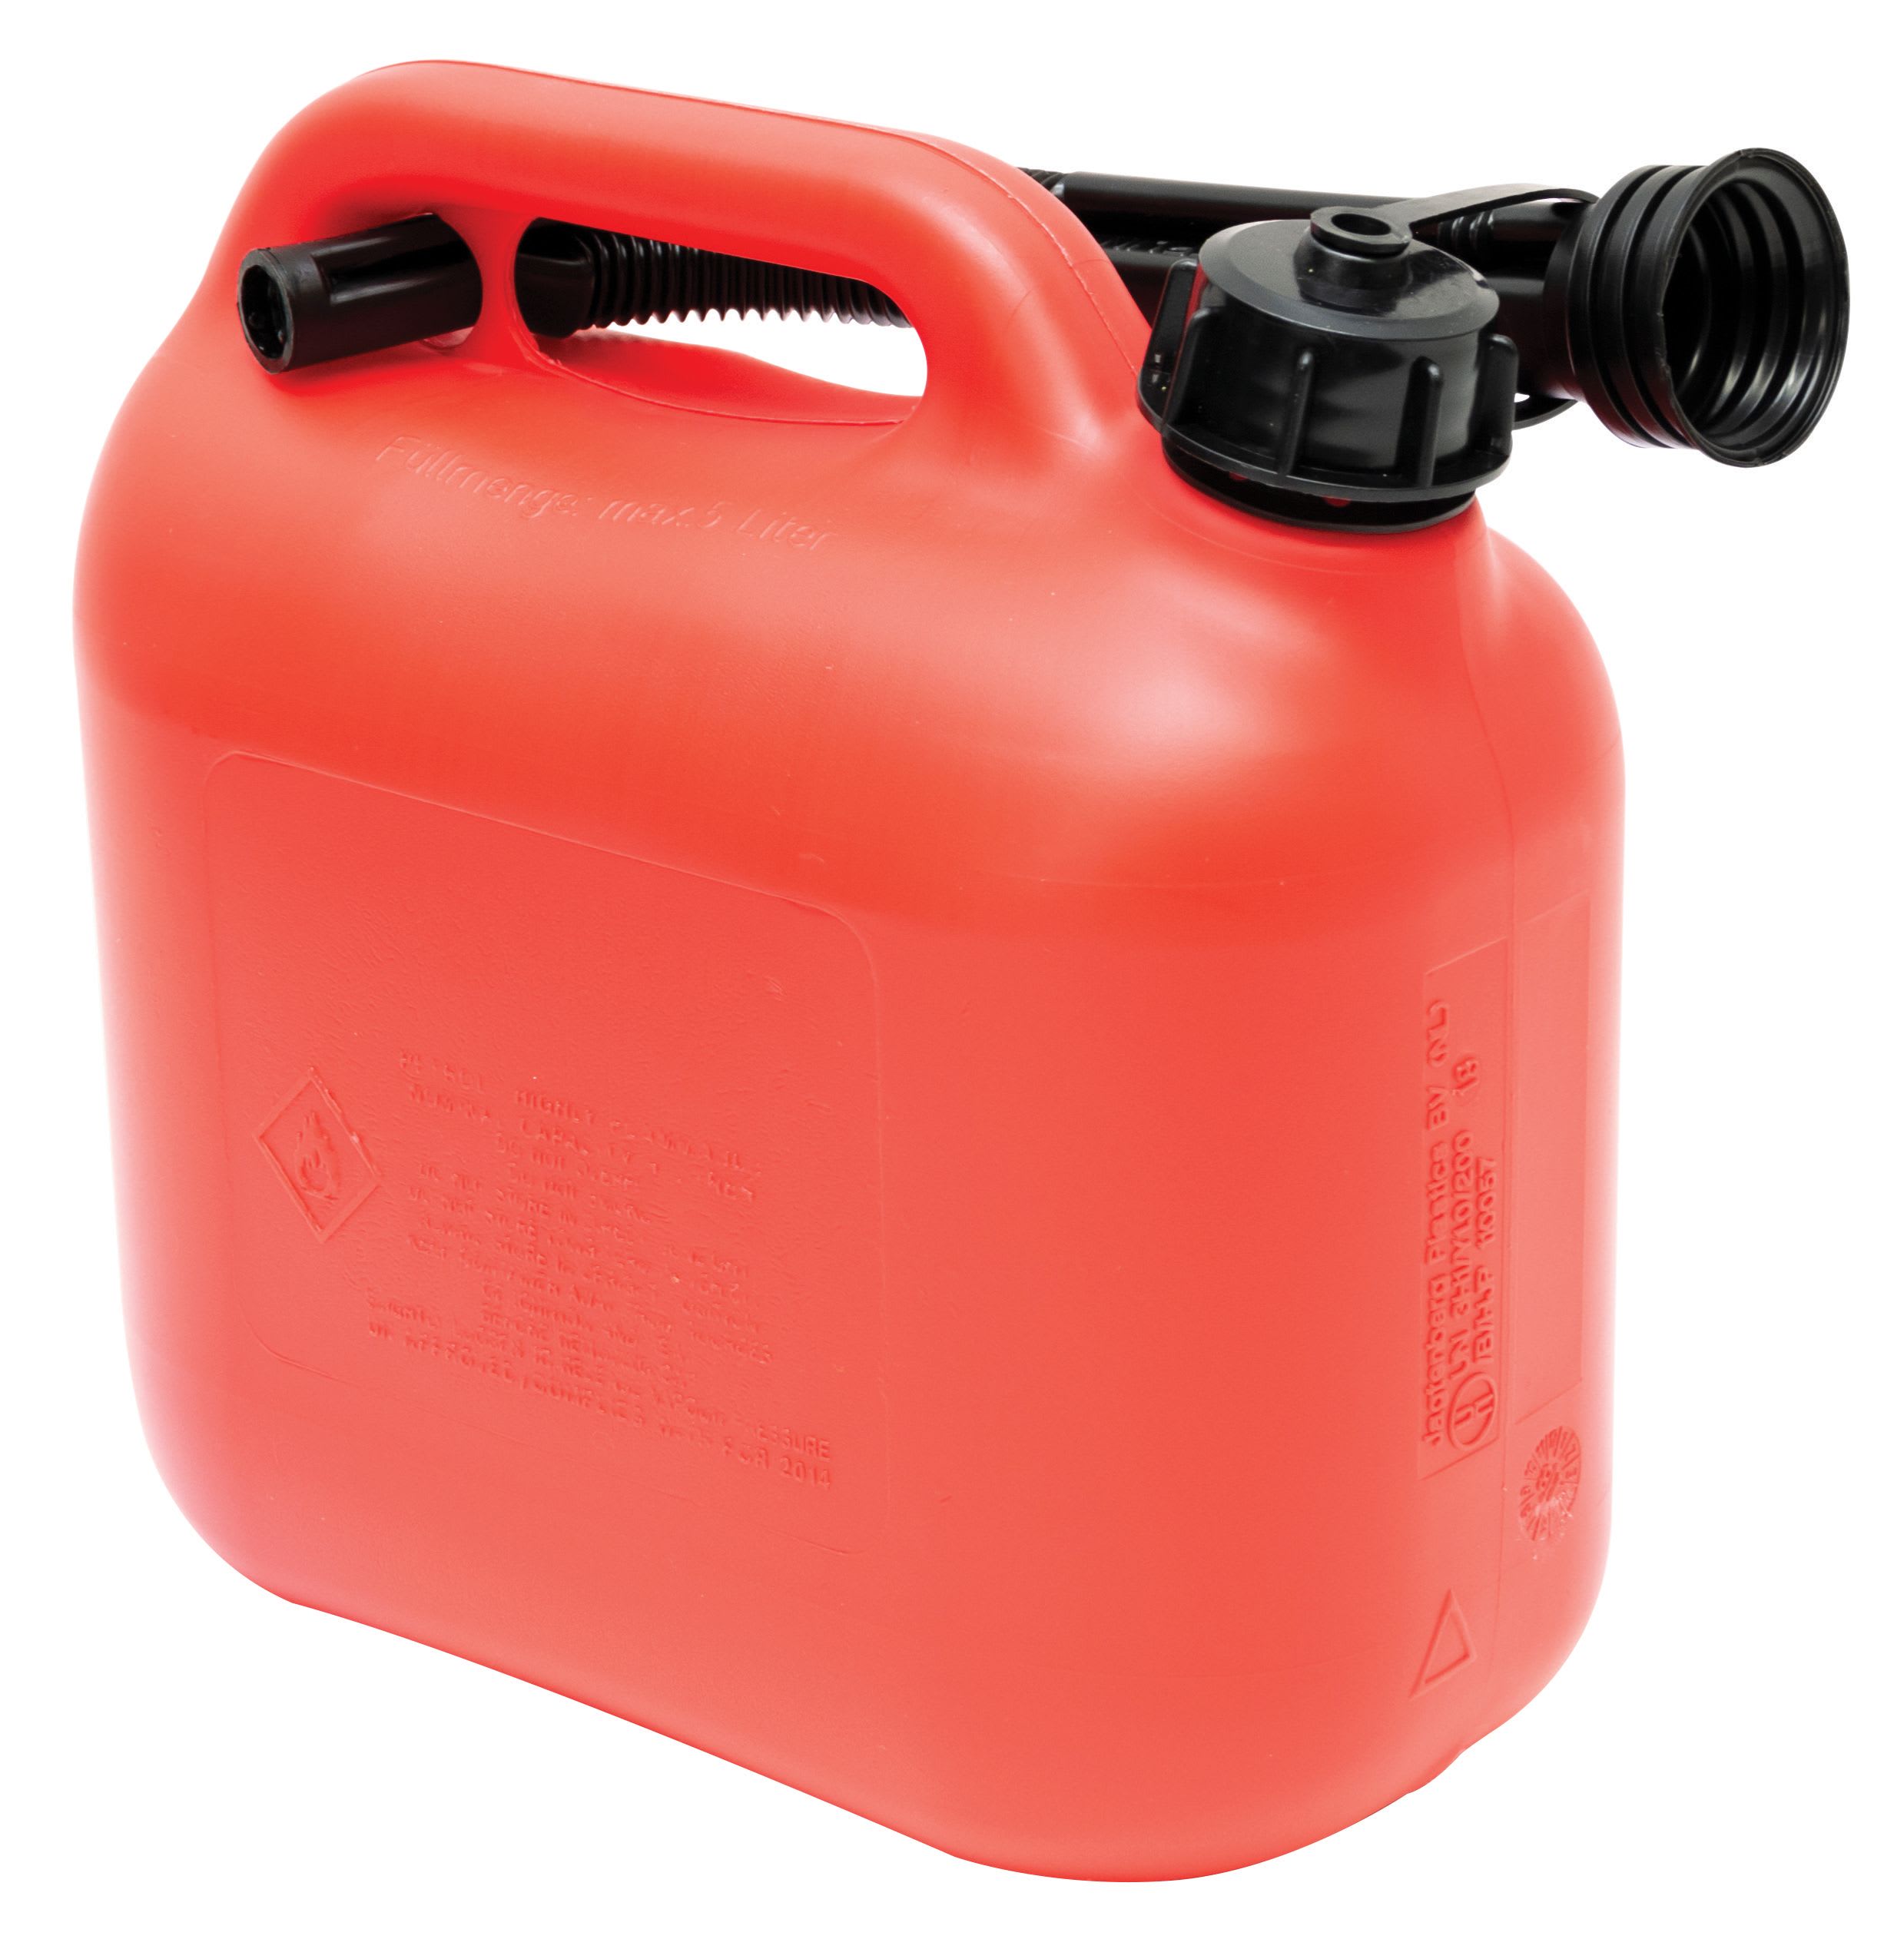 The Handy 5L Plastic Fuel Can - Red